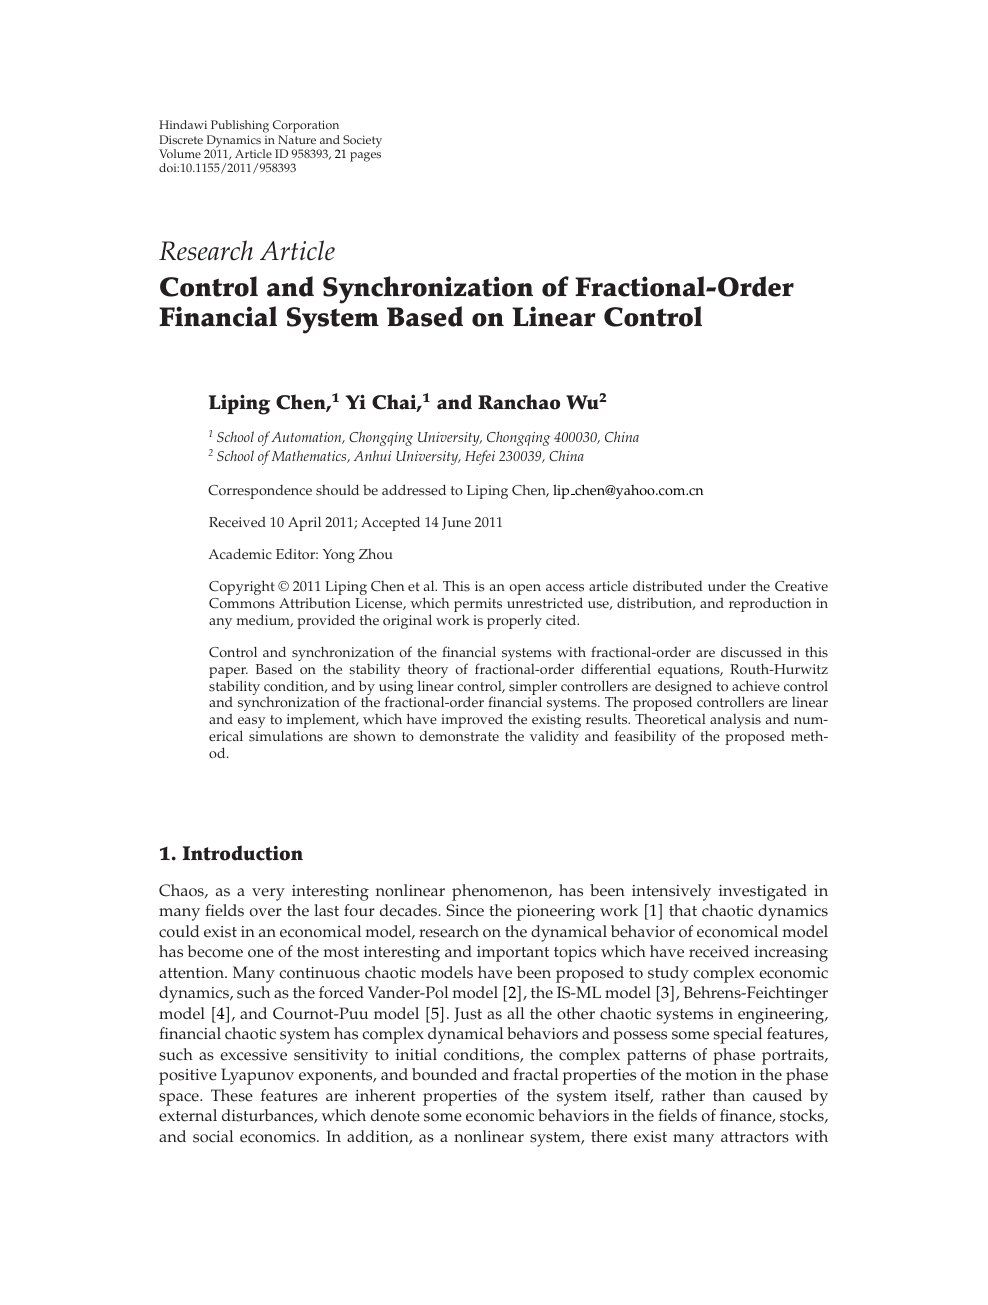 Control And Synchronization Of Fractional Order Financial System Based On Linear Control Topic Of Research Paper In Mathematics Download Scholarly Article Pdf And Read For Free On Cyberleninka Open Science Hub